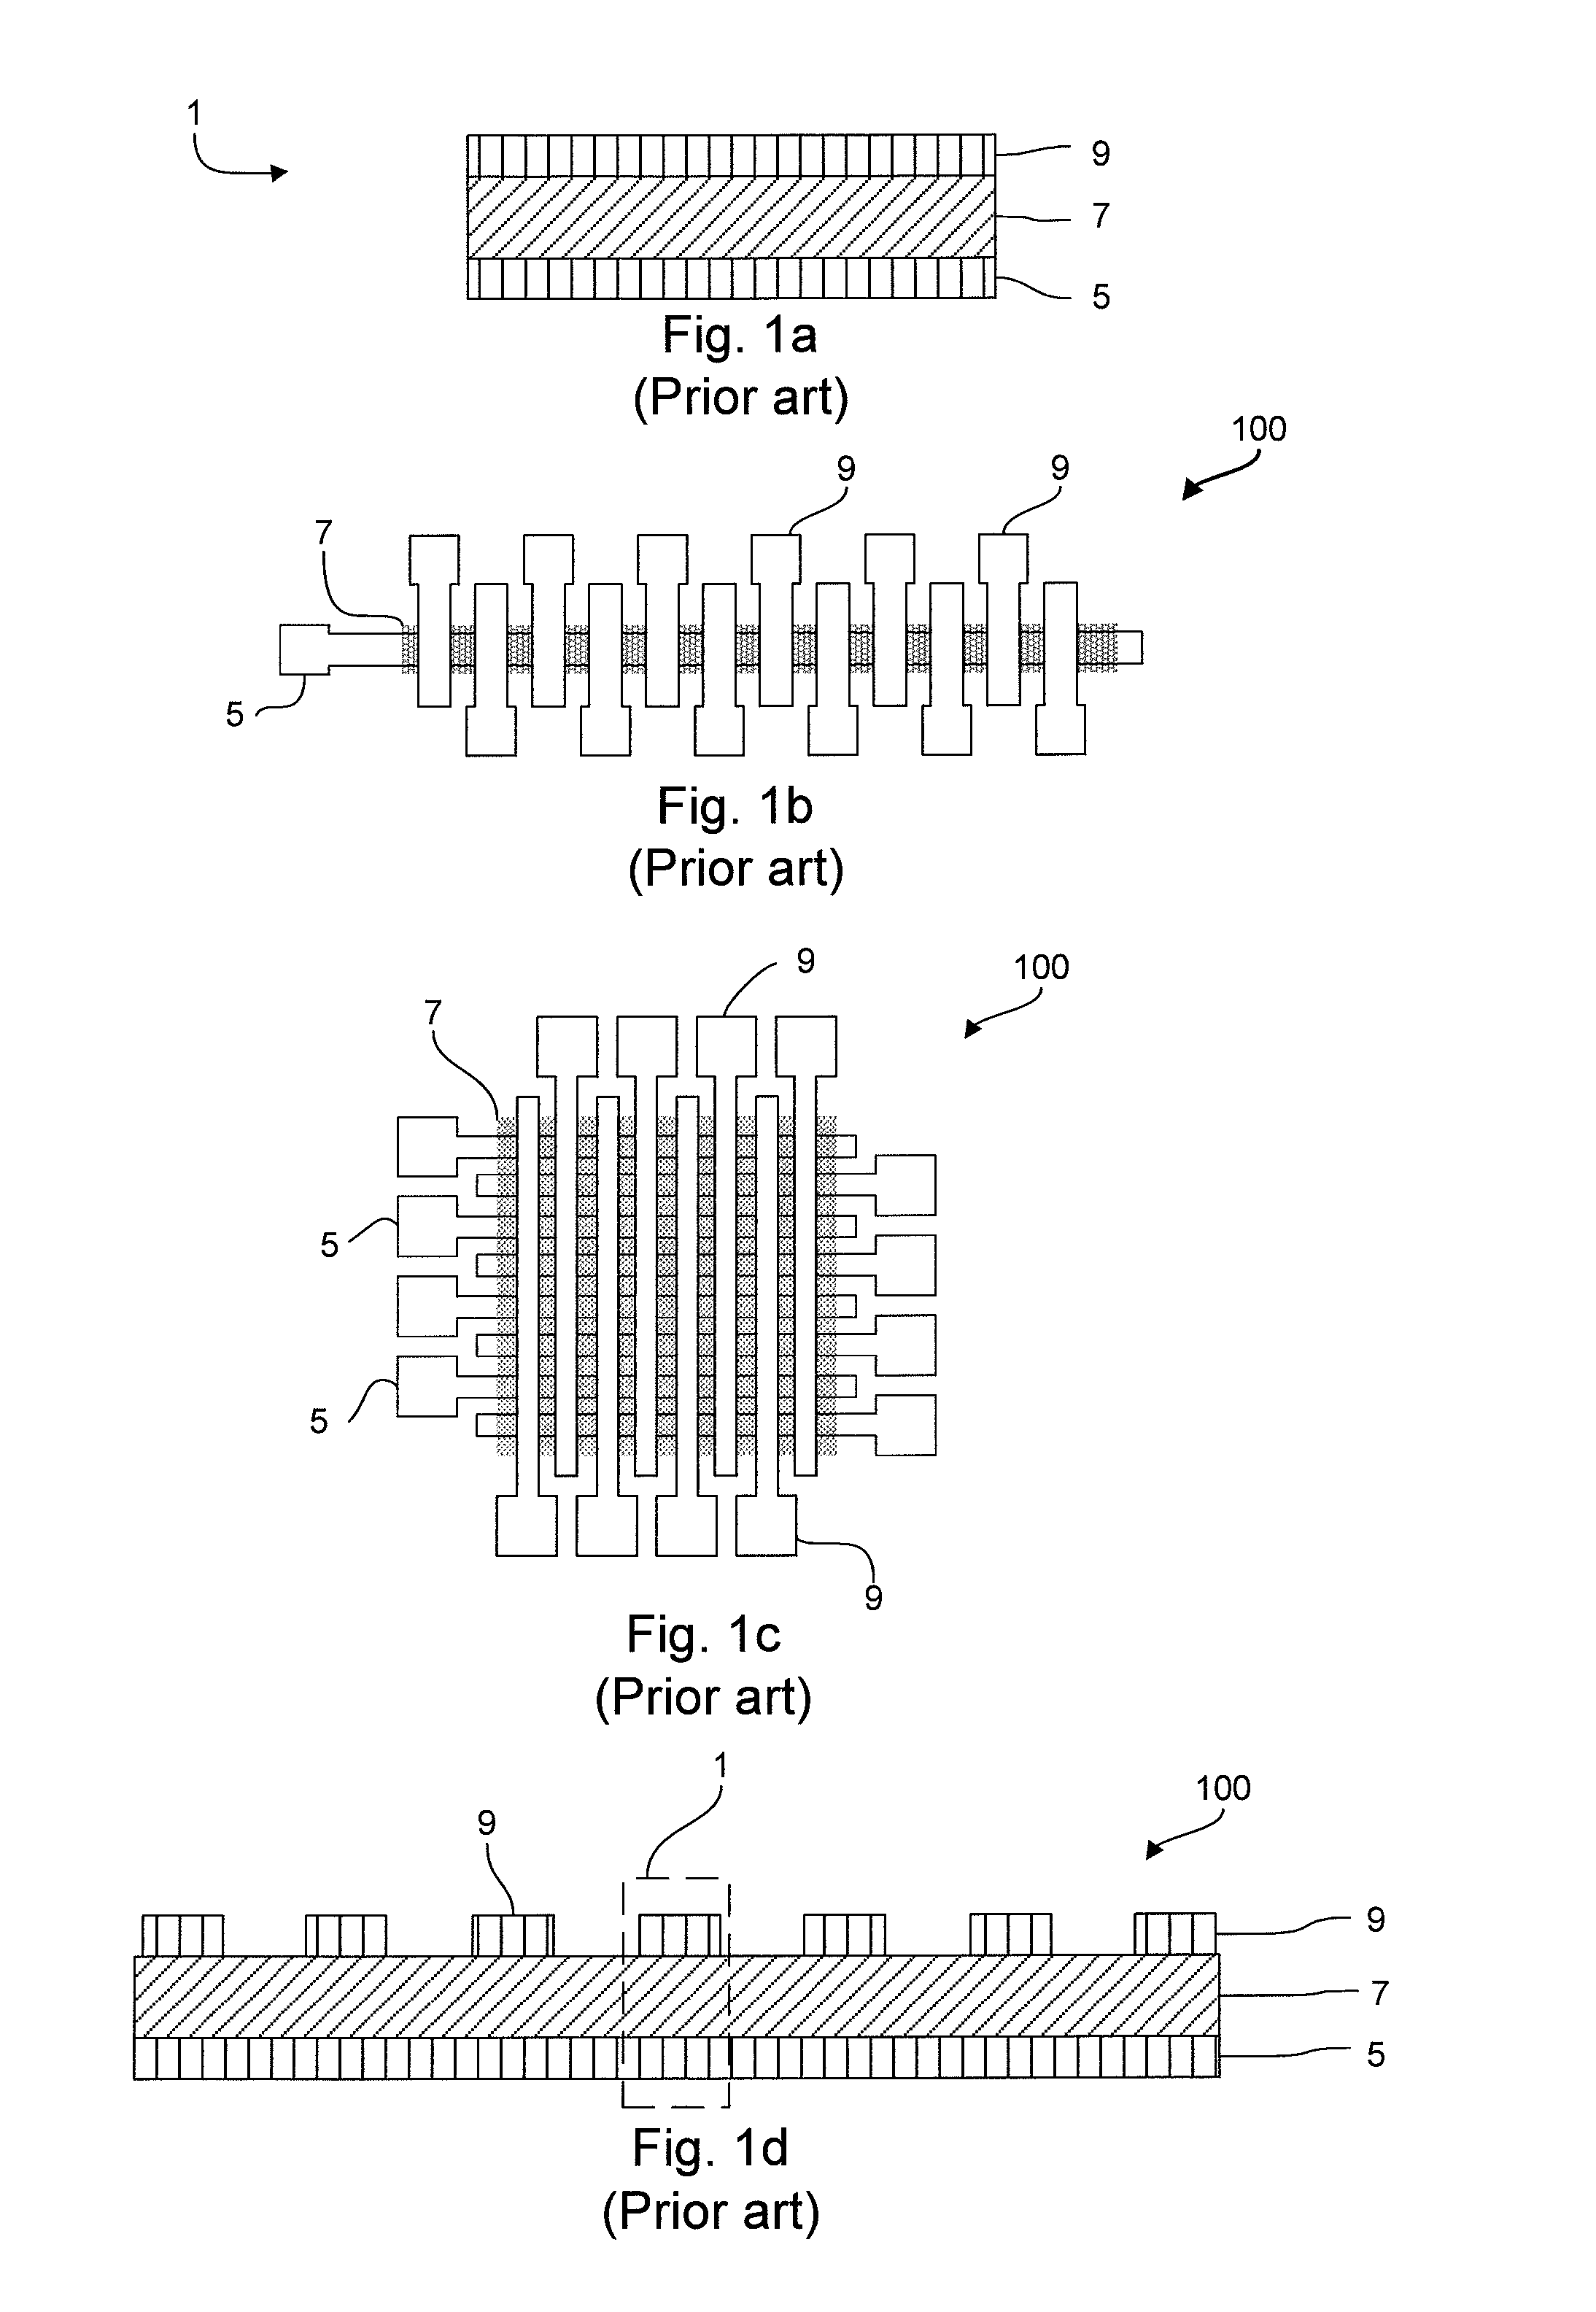 Short circuit reduction in a ferroelectric memory cell comprising a stack of layers arranged on a flexible substrate